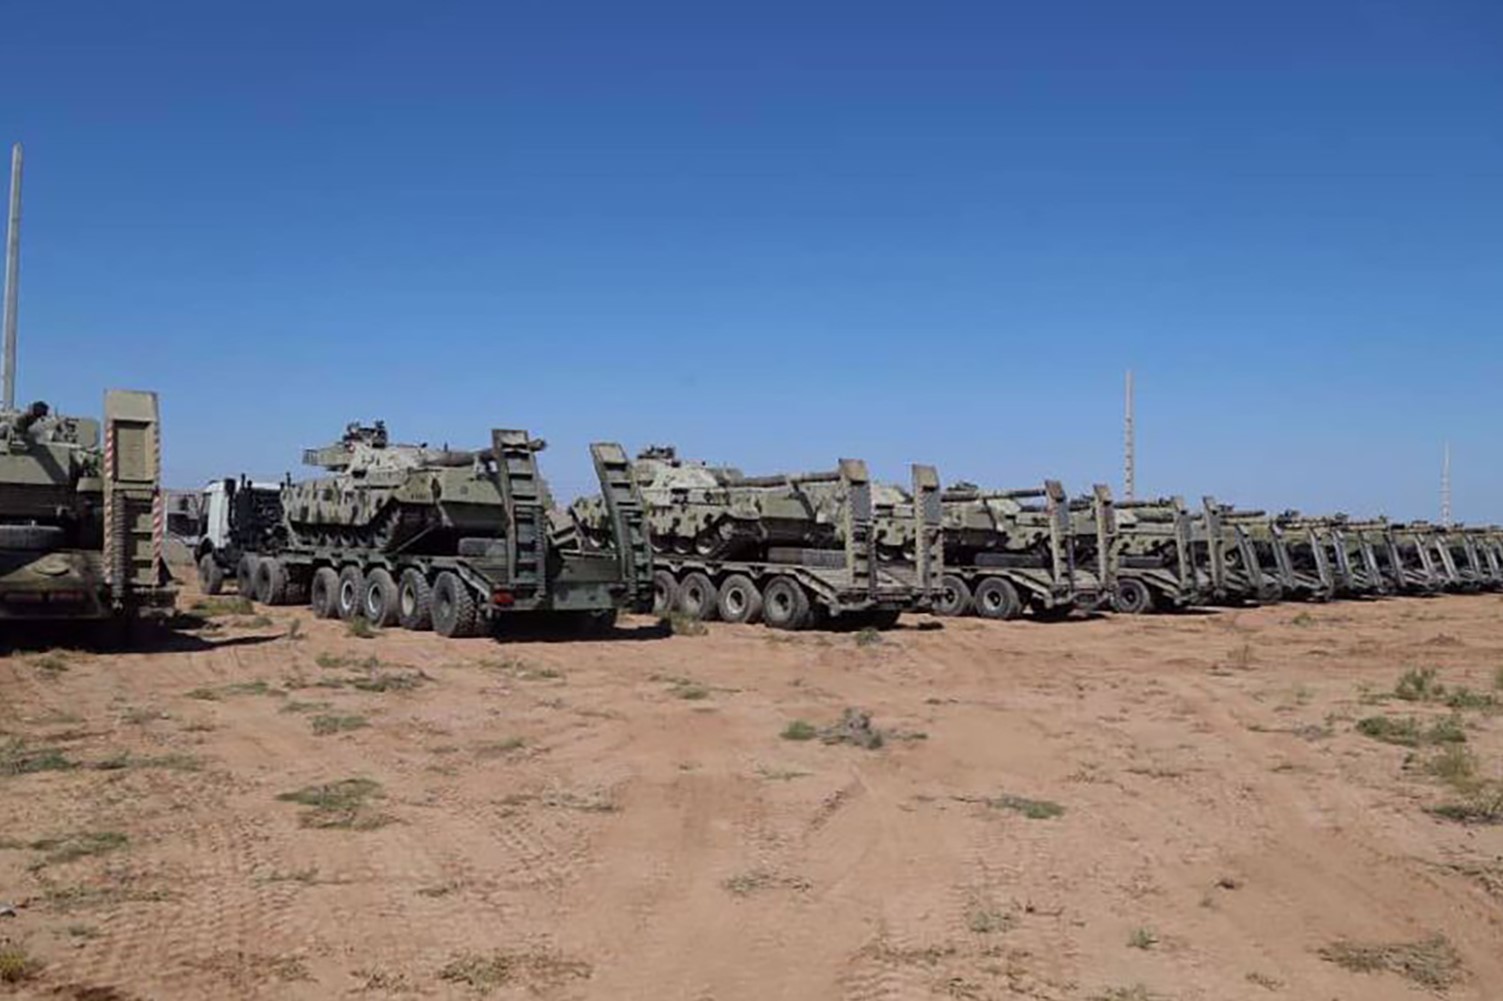 Vehicle-mounted self-propelled rocket launcher systems arranged for 1 October Iranian military exercises